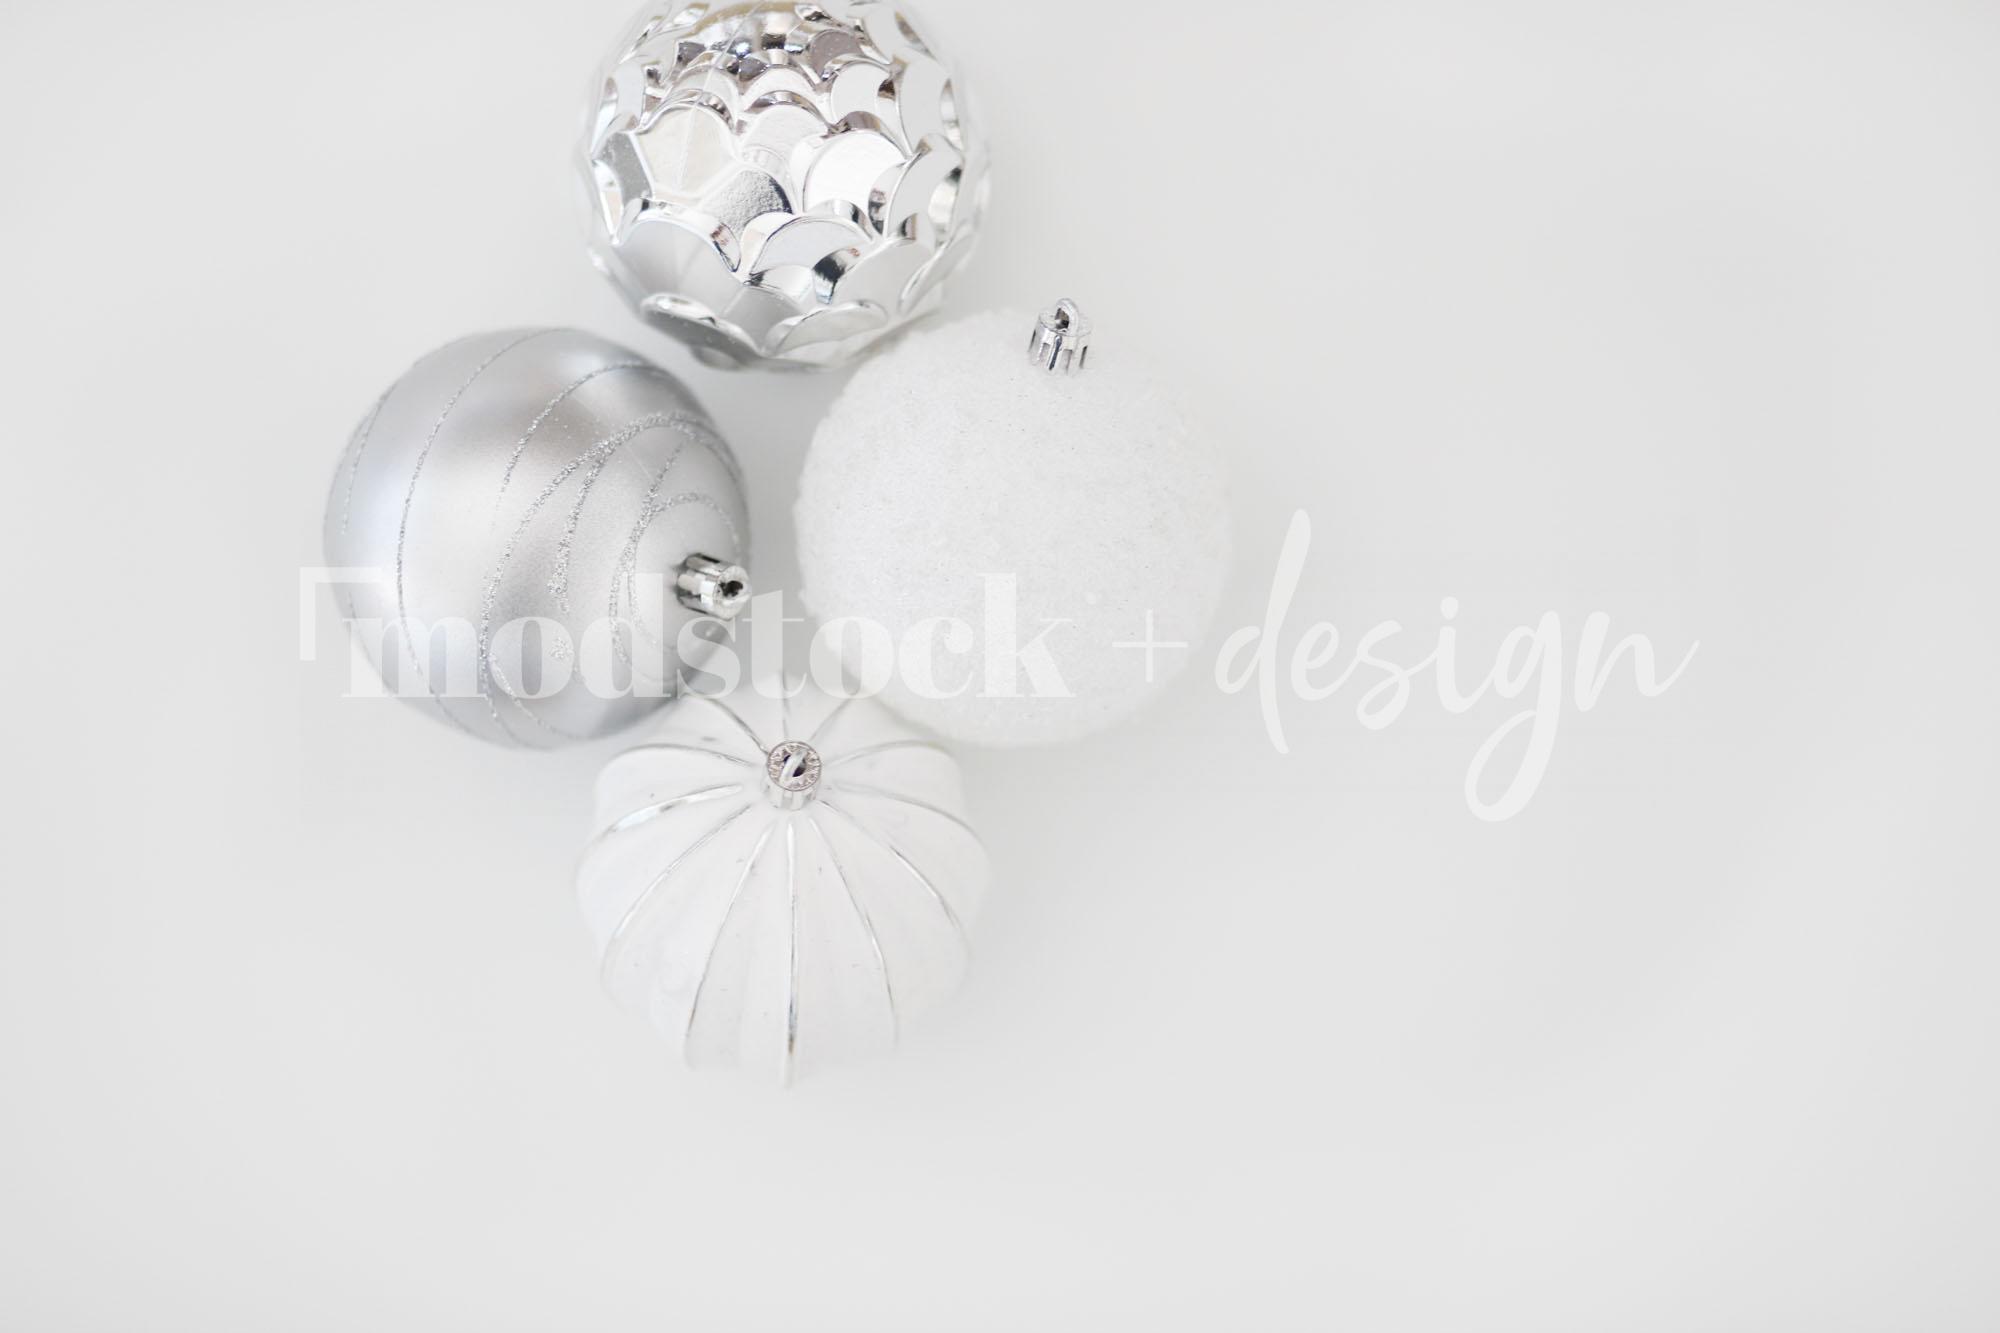 Ornaments and Baubles 44